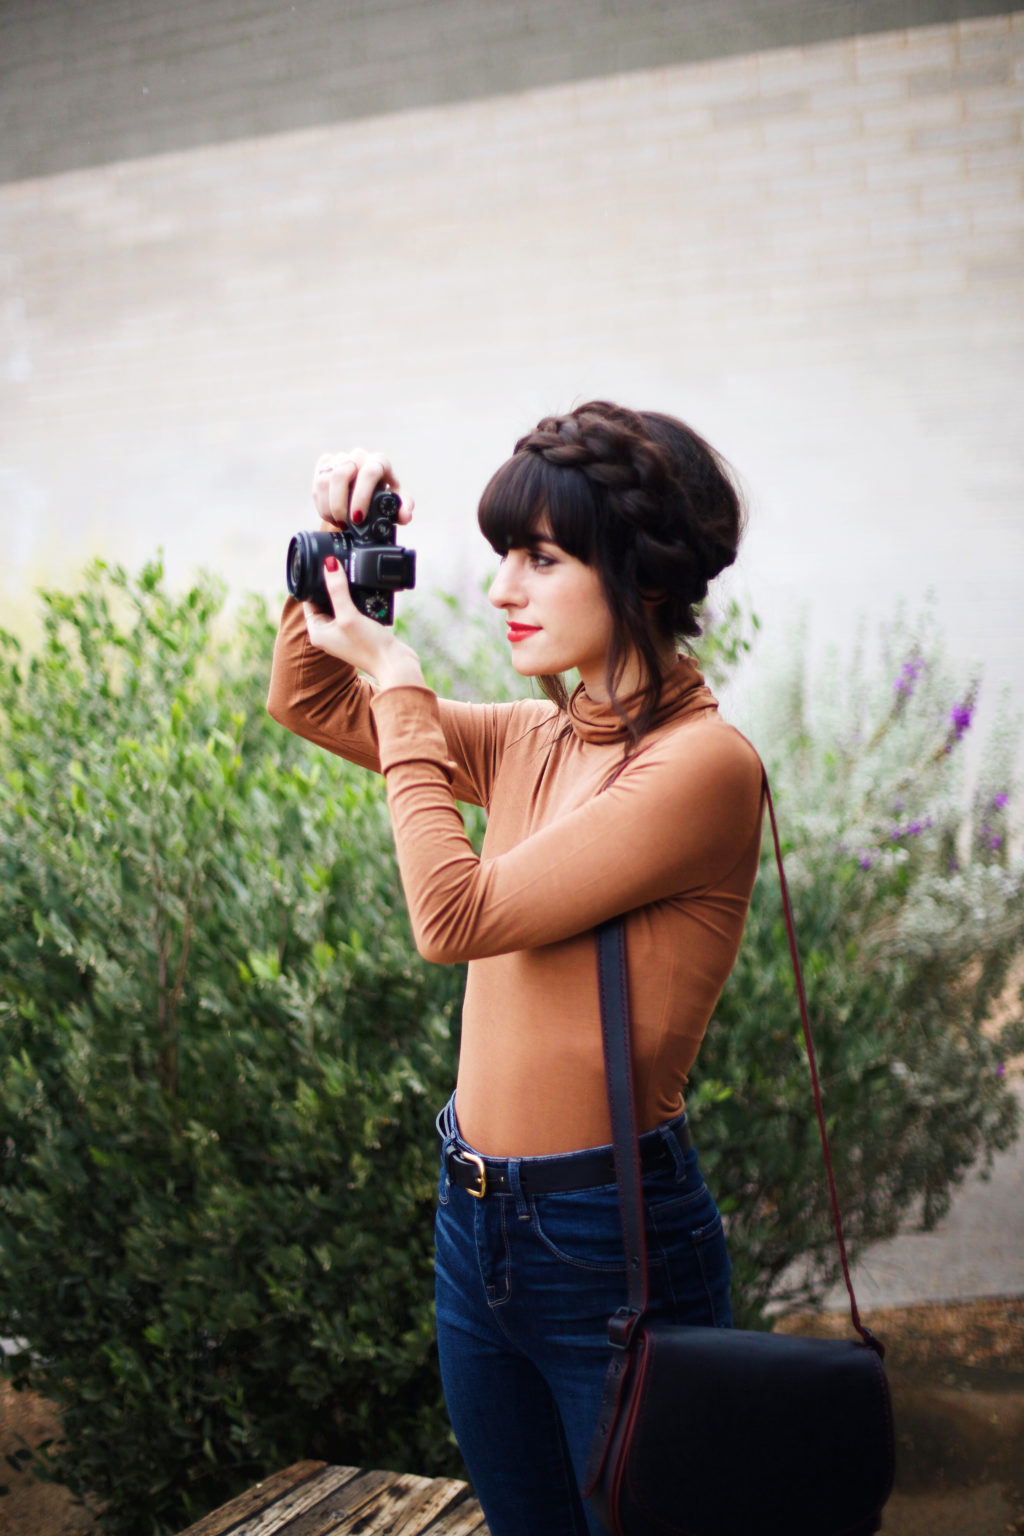 NEW DARLINGS - CANON - CAMERA/PHOTOGRAPHY TIPS